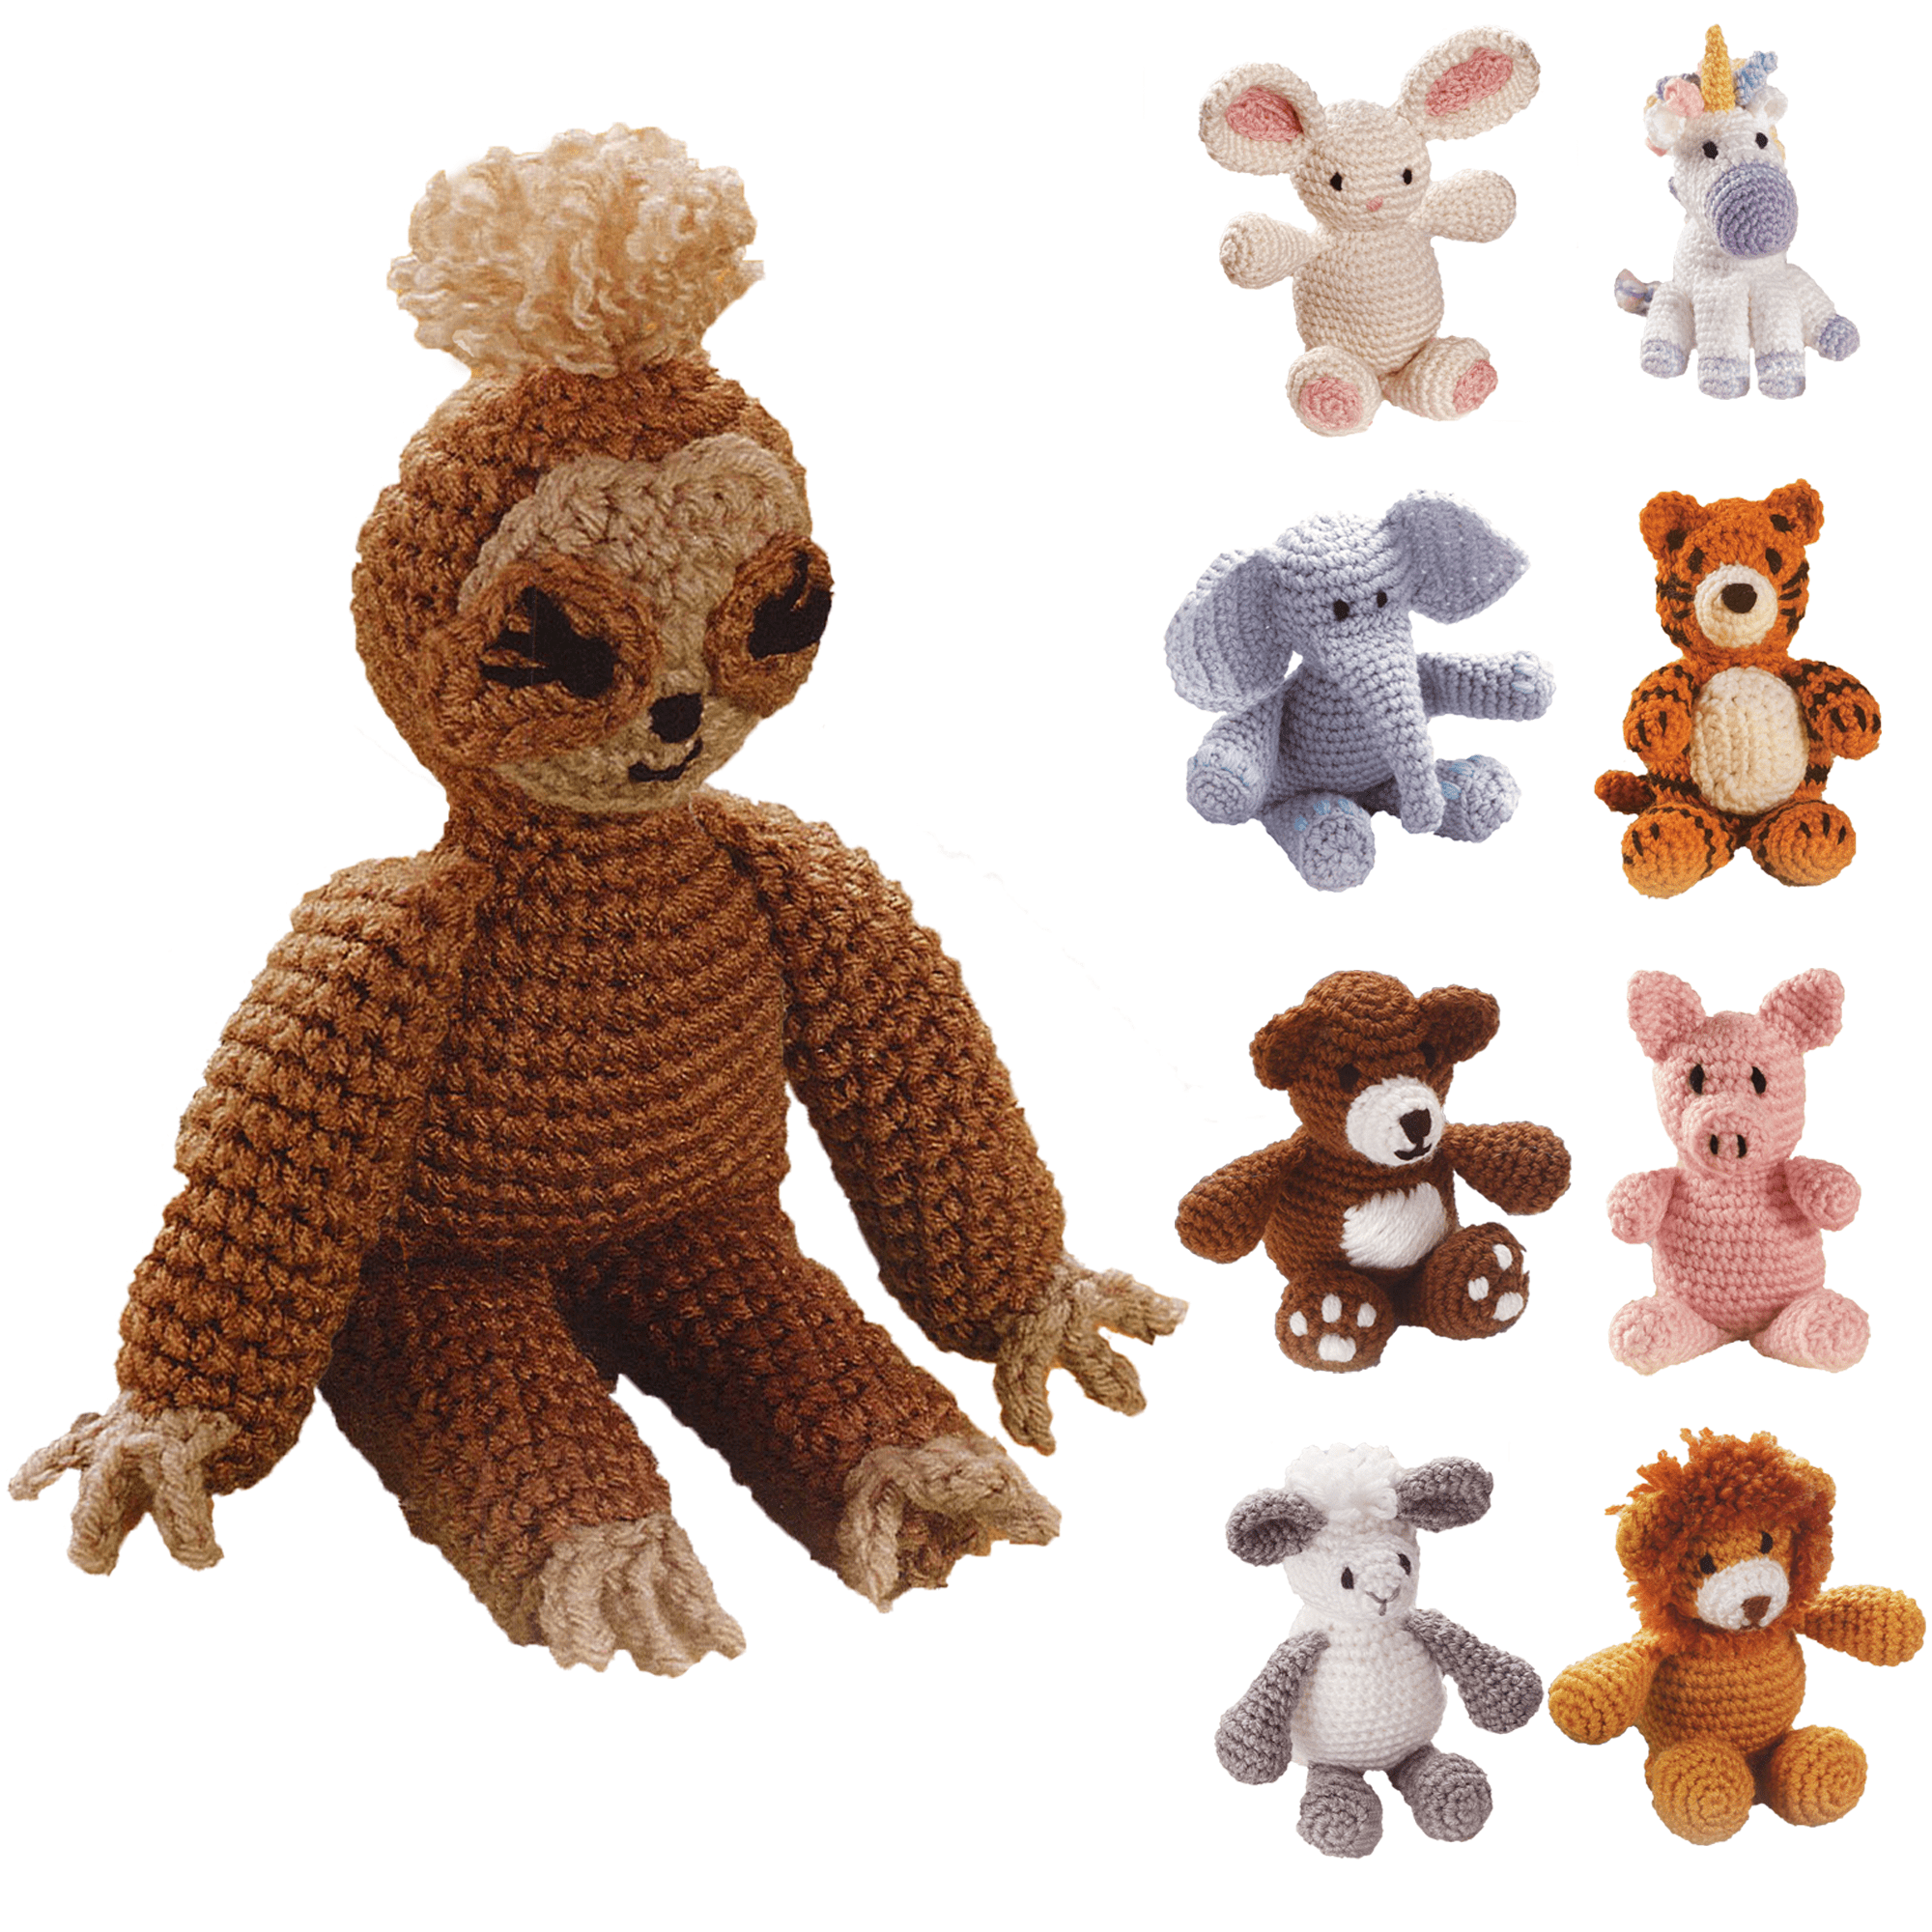 Crochet Stuffed Animal Bear DIY Kit, Craft Kit for Teens and Adults, All Materials Included, Detailed Instructions with 54 Pictures, Hypoallergenic